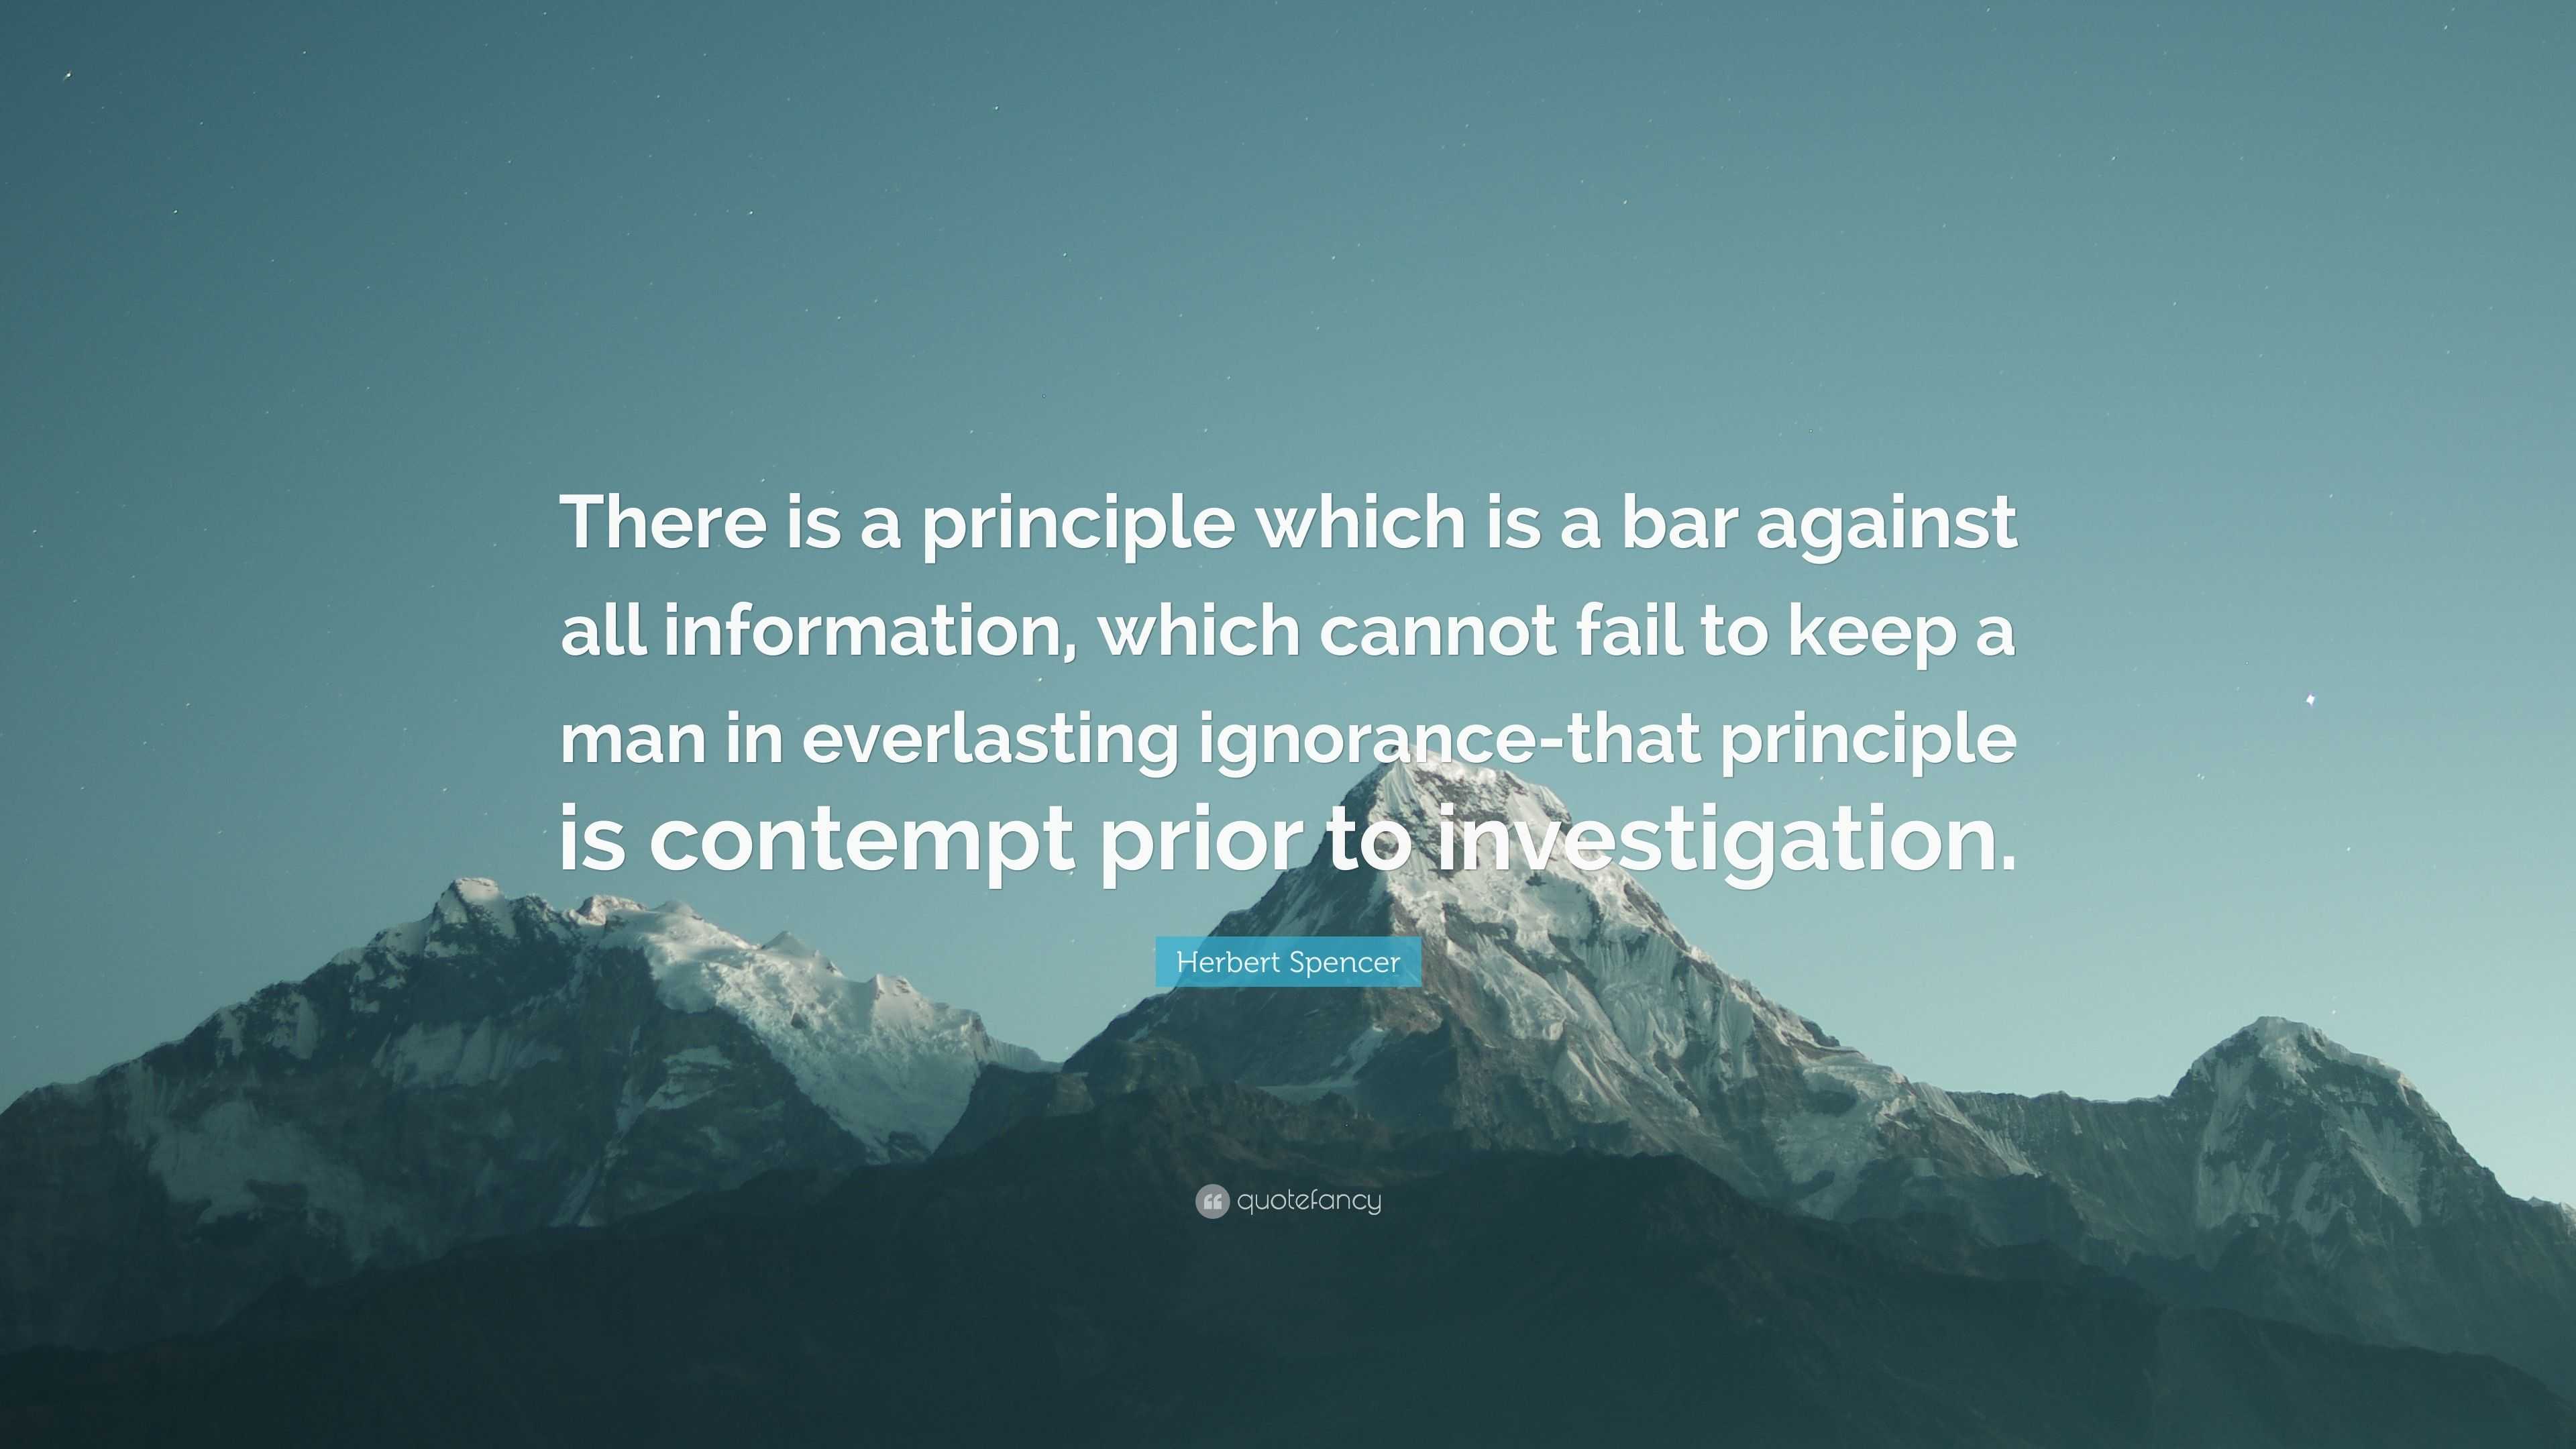 Herbert Spencer Quote: “There is a principle which is a bar against all